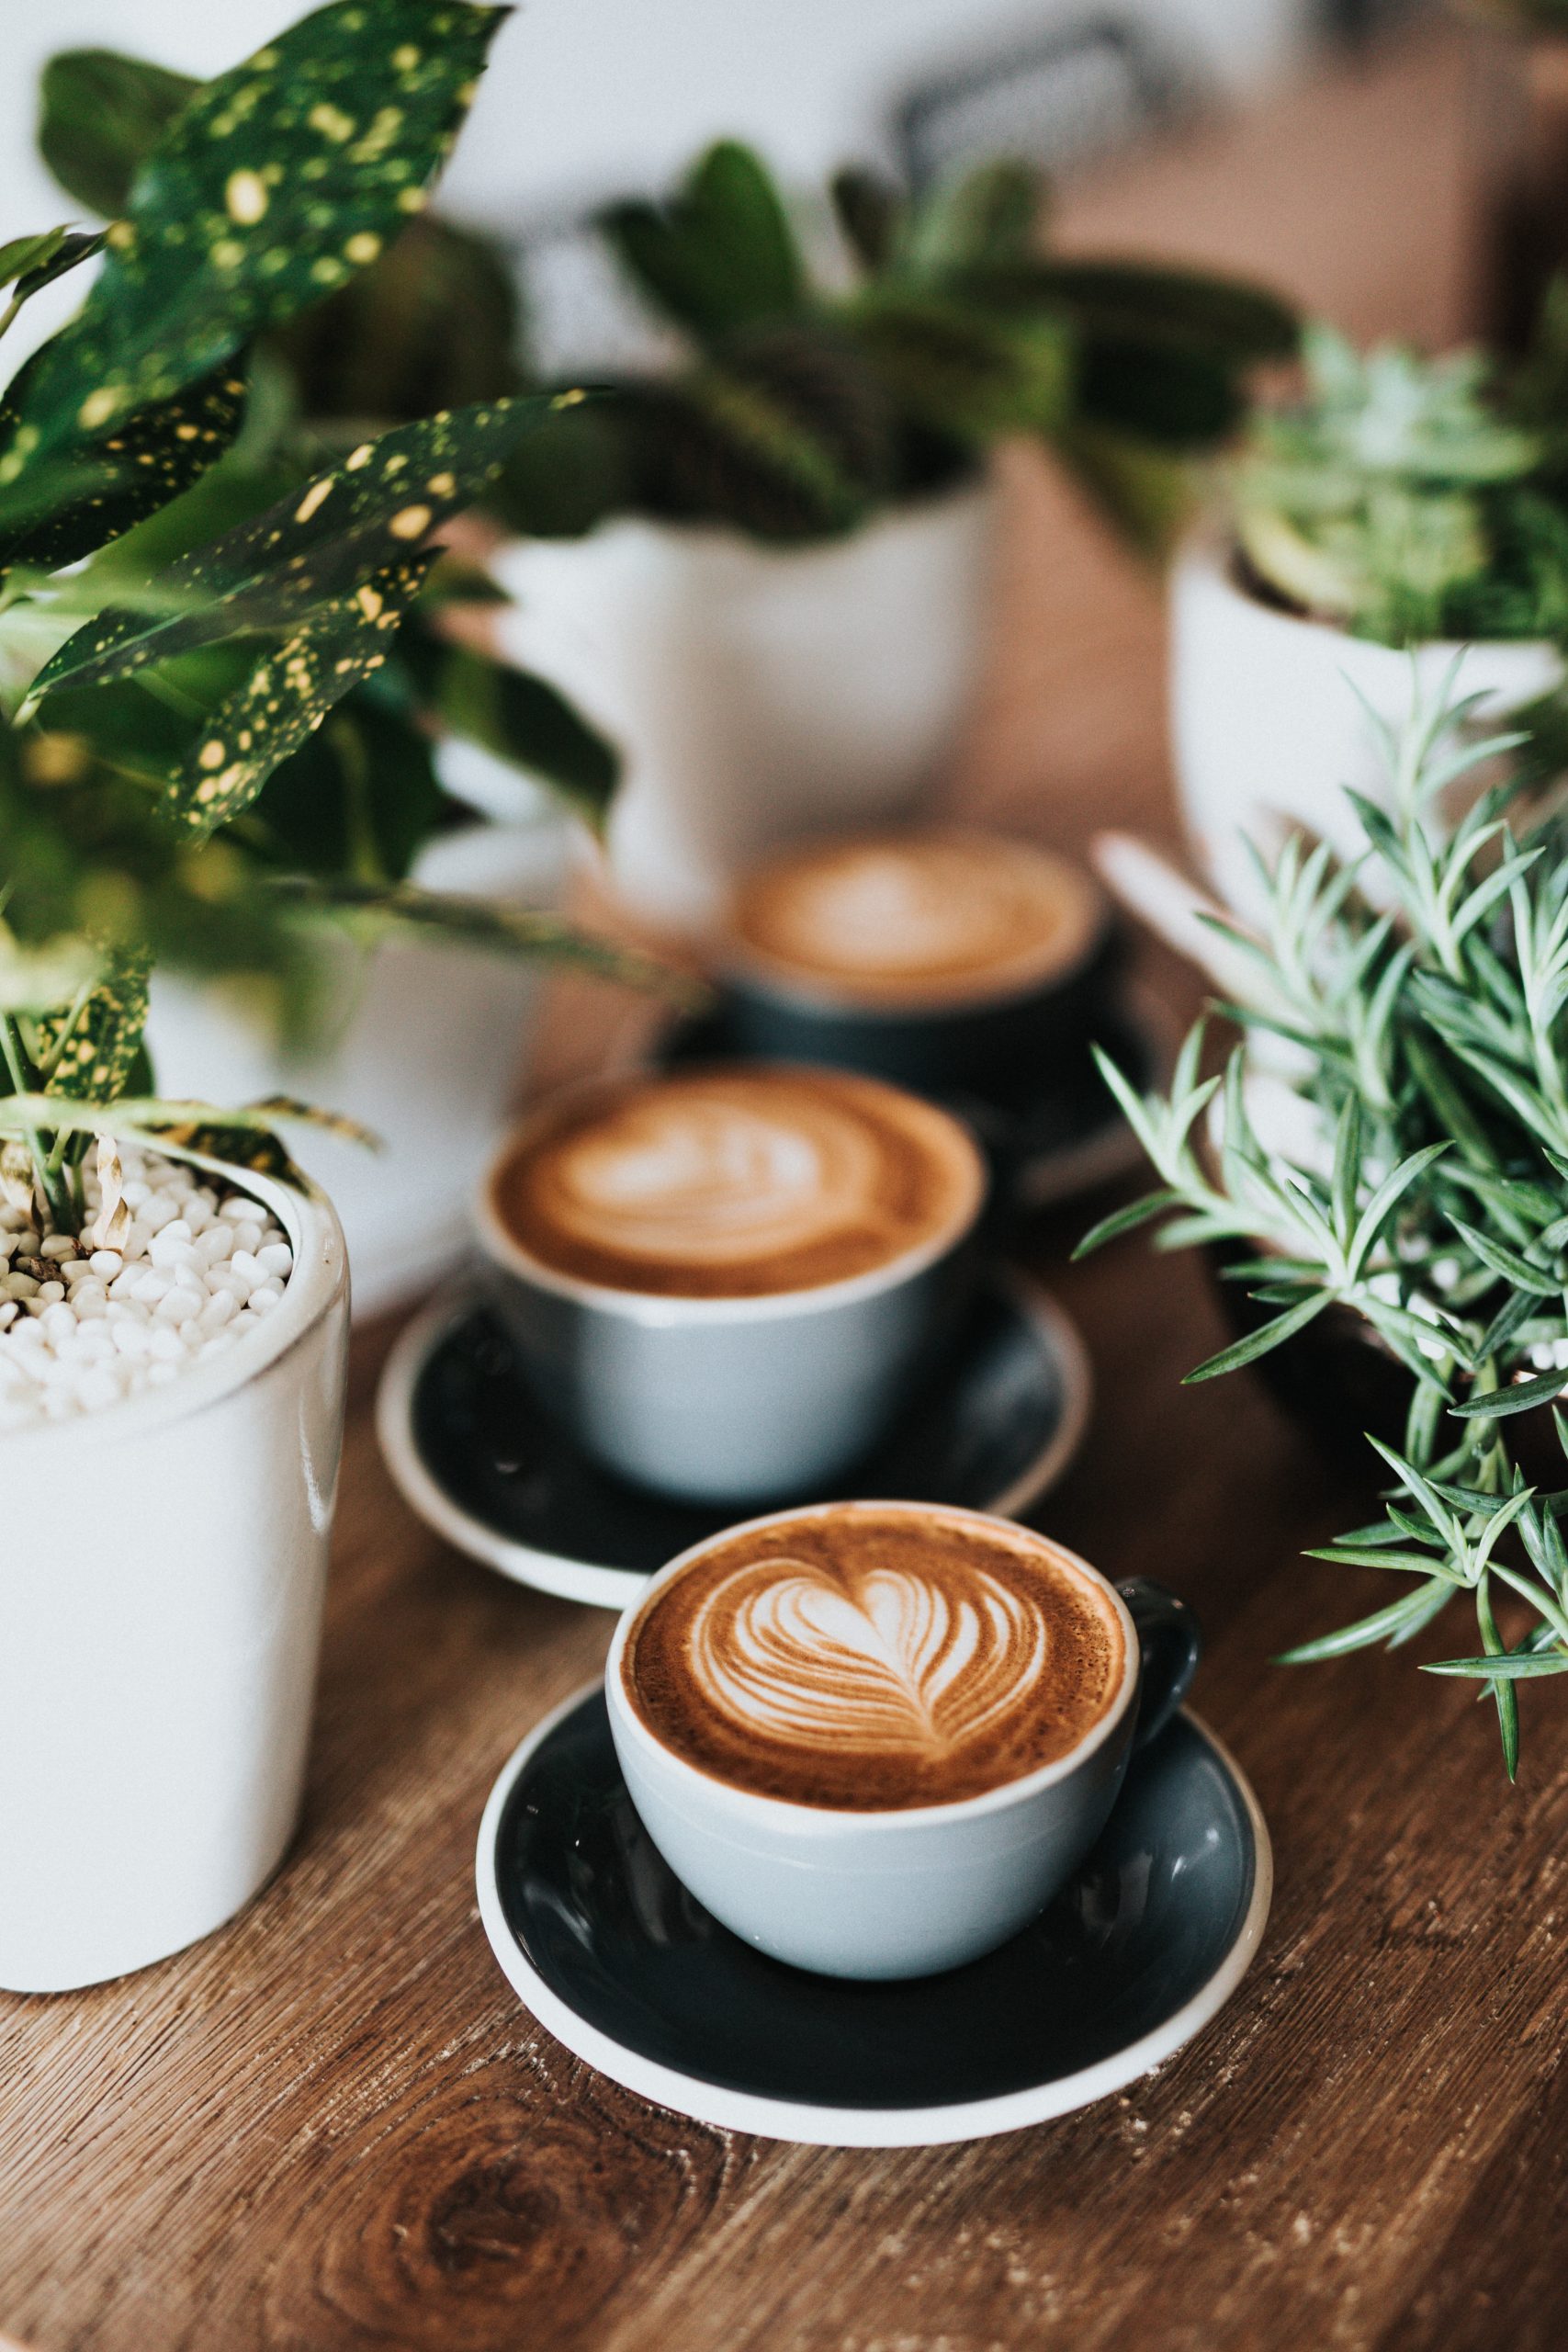 Three lattes on a table surrounded by plants.